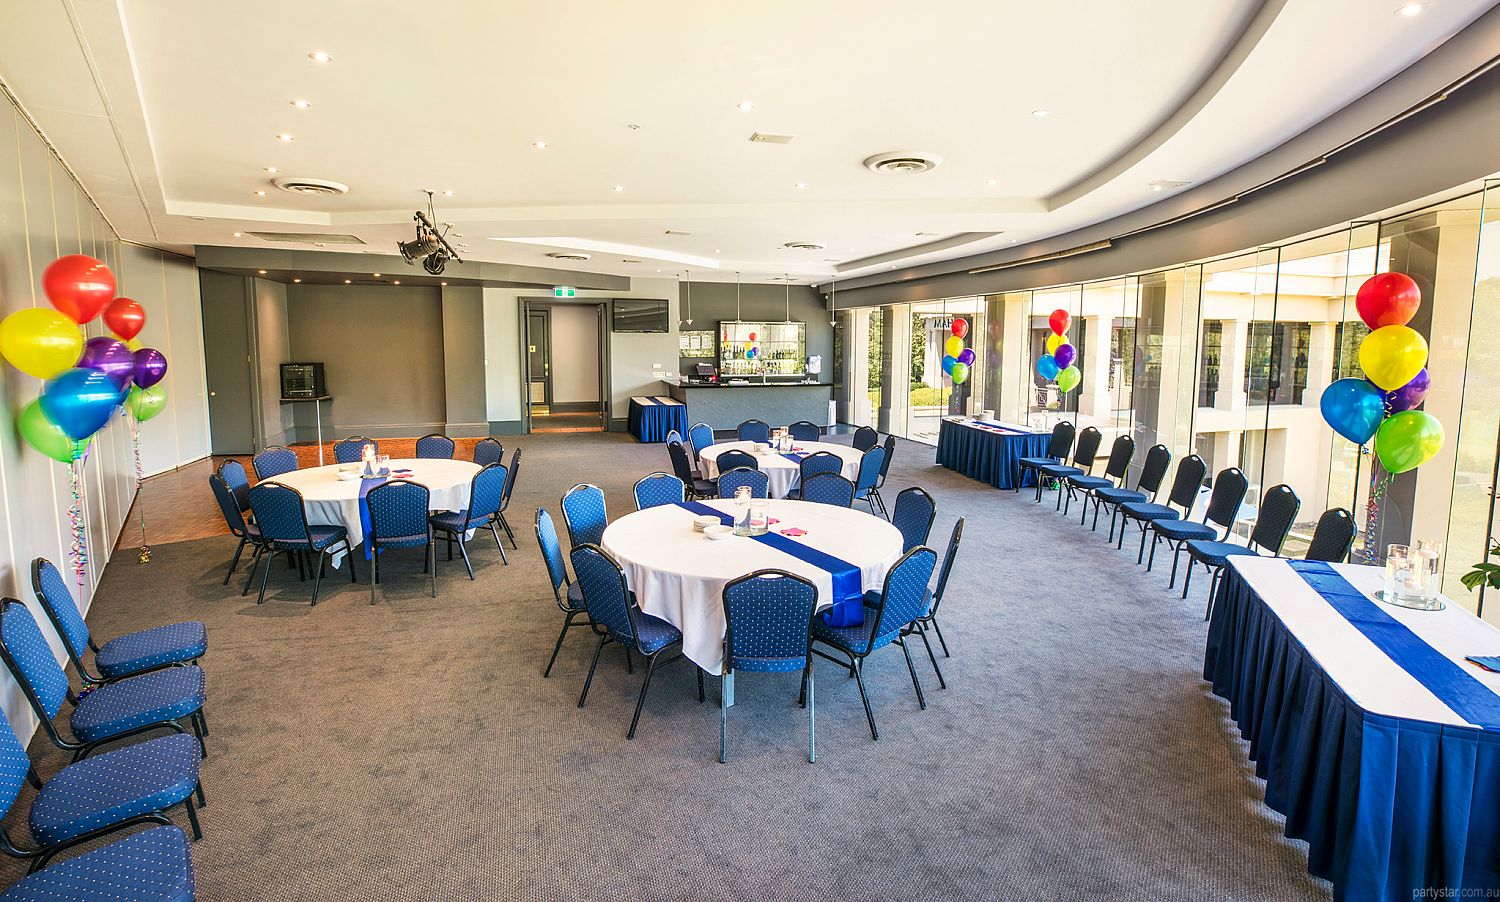 The Manningham, Bulleen, VIC. Function Room hire photo #1